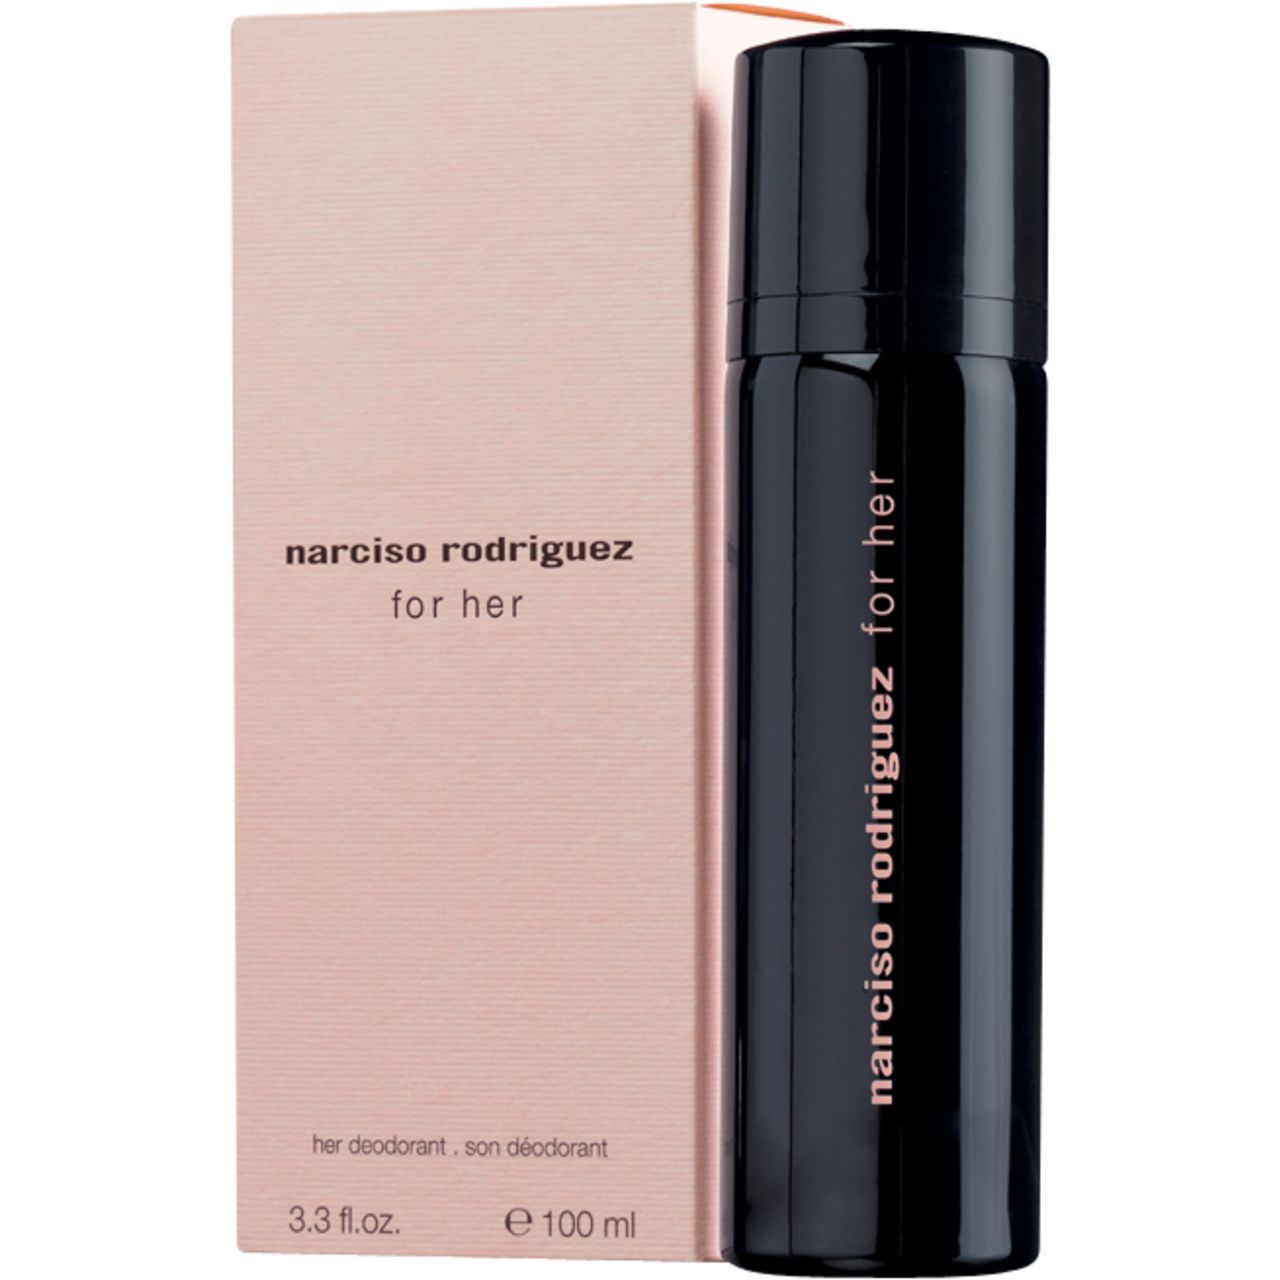 Narciso Rodriguez, For Her Deodorant Spray